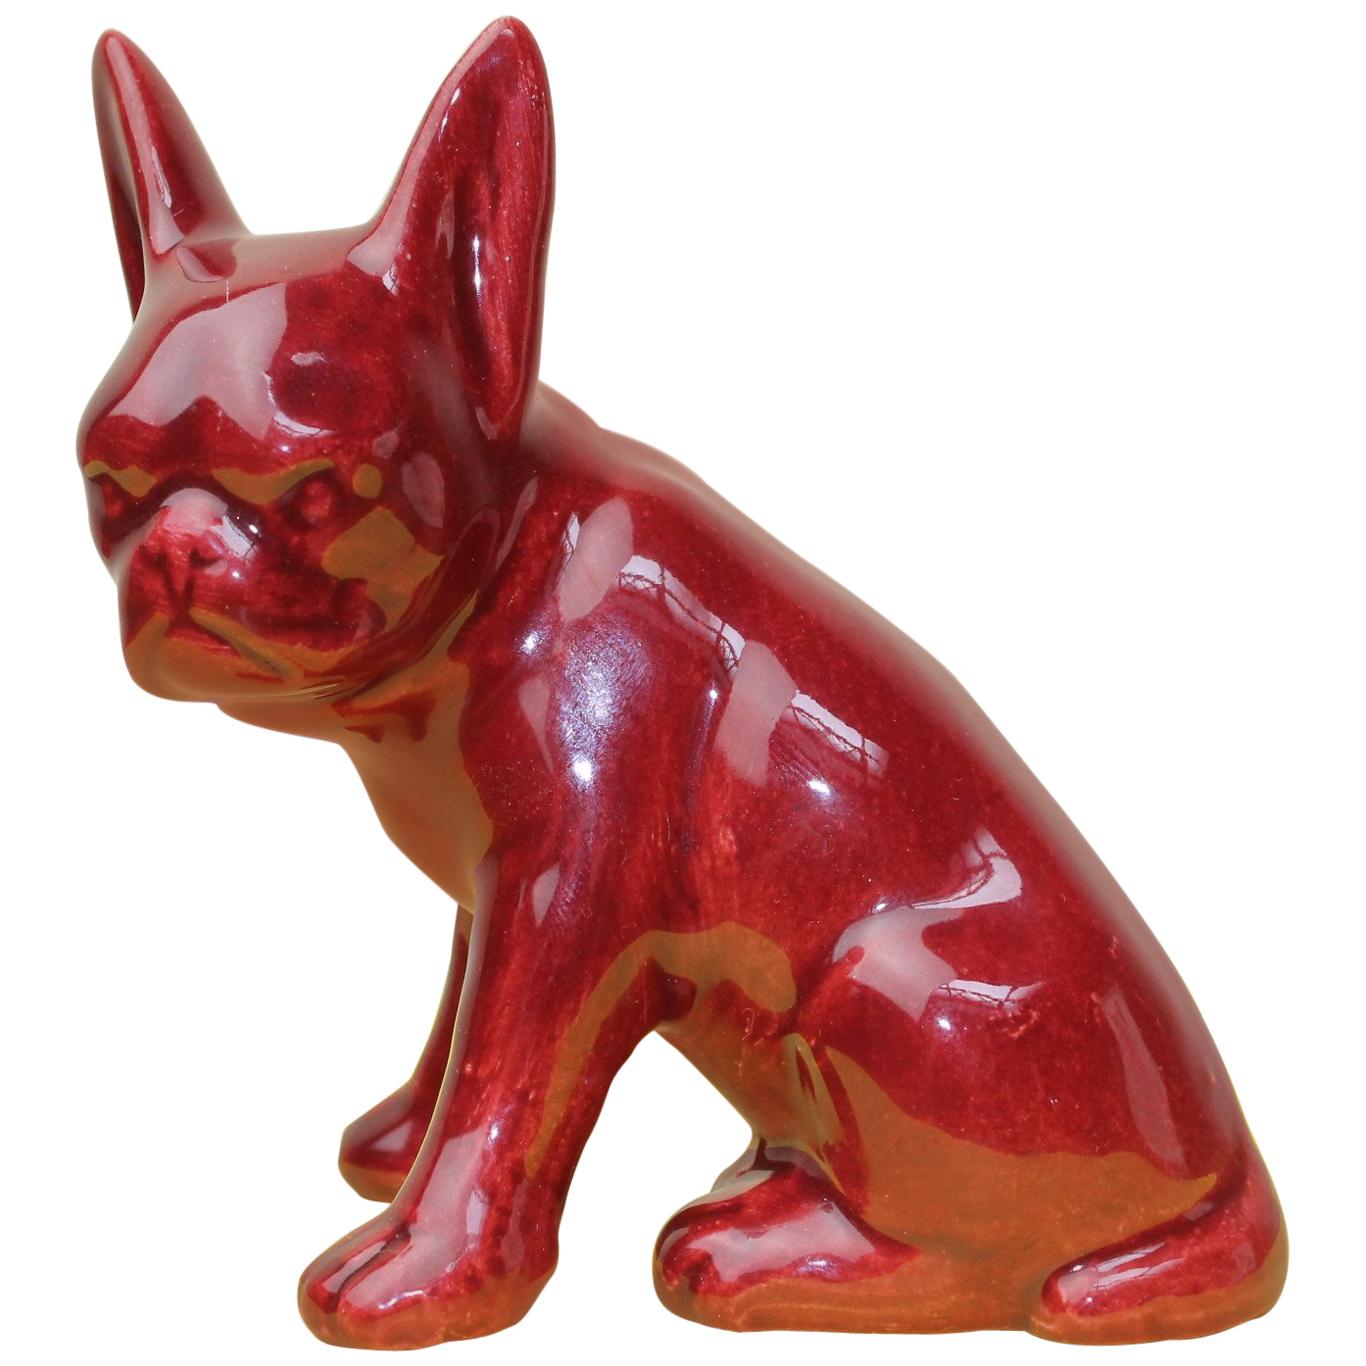 1950s Red-Bordeaux French Bulldog Figurine